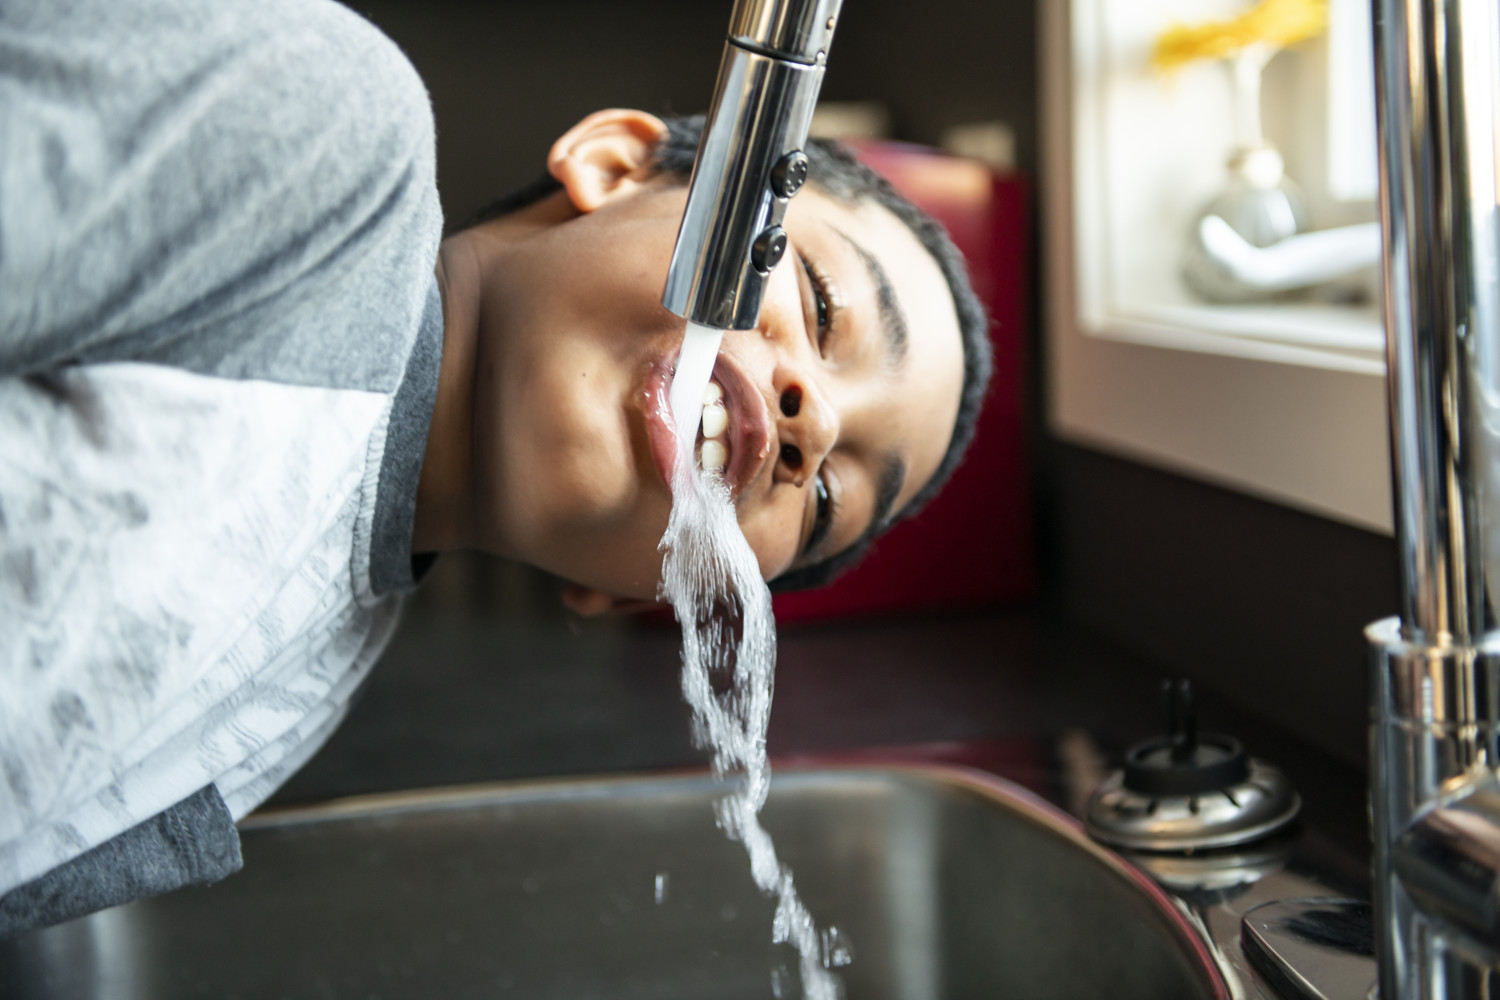 Boy drinks tap water from kitchen faucet